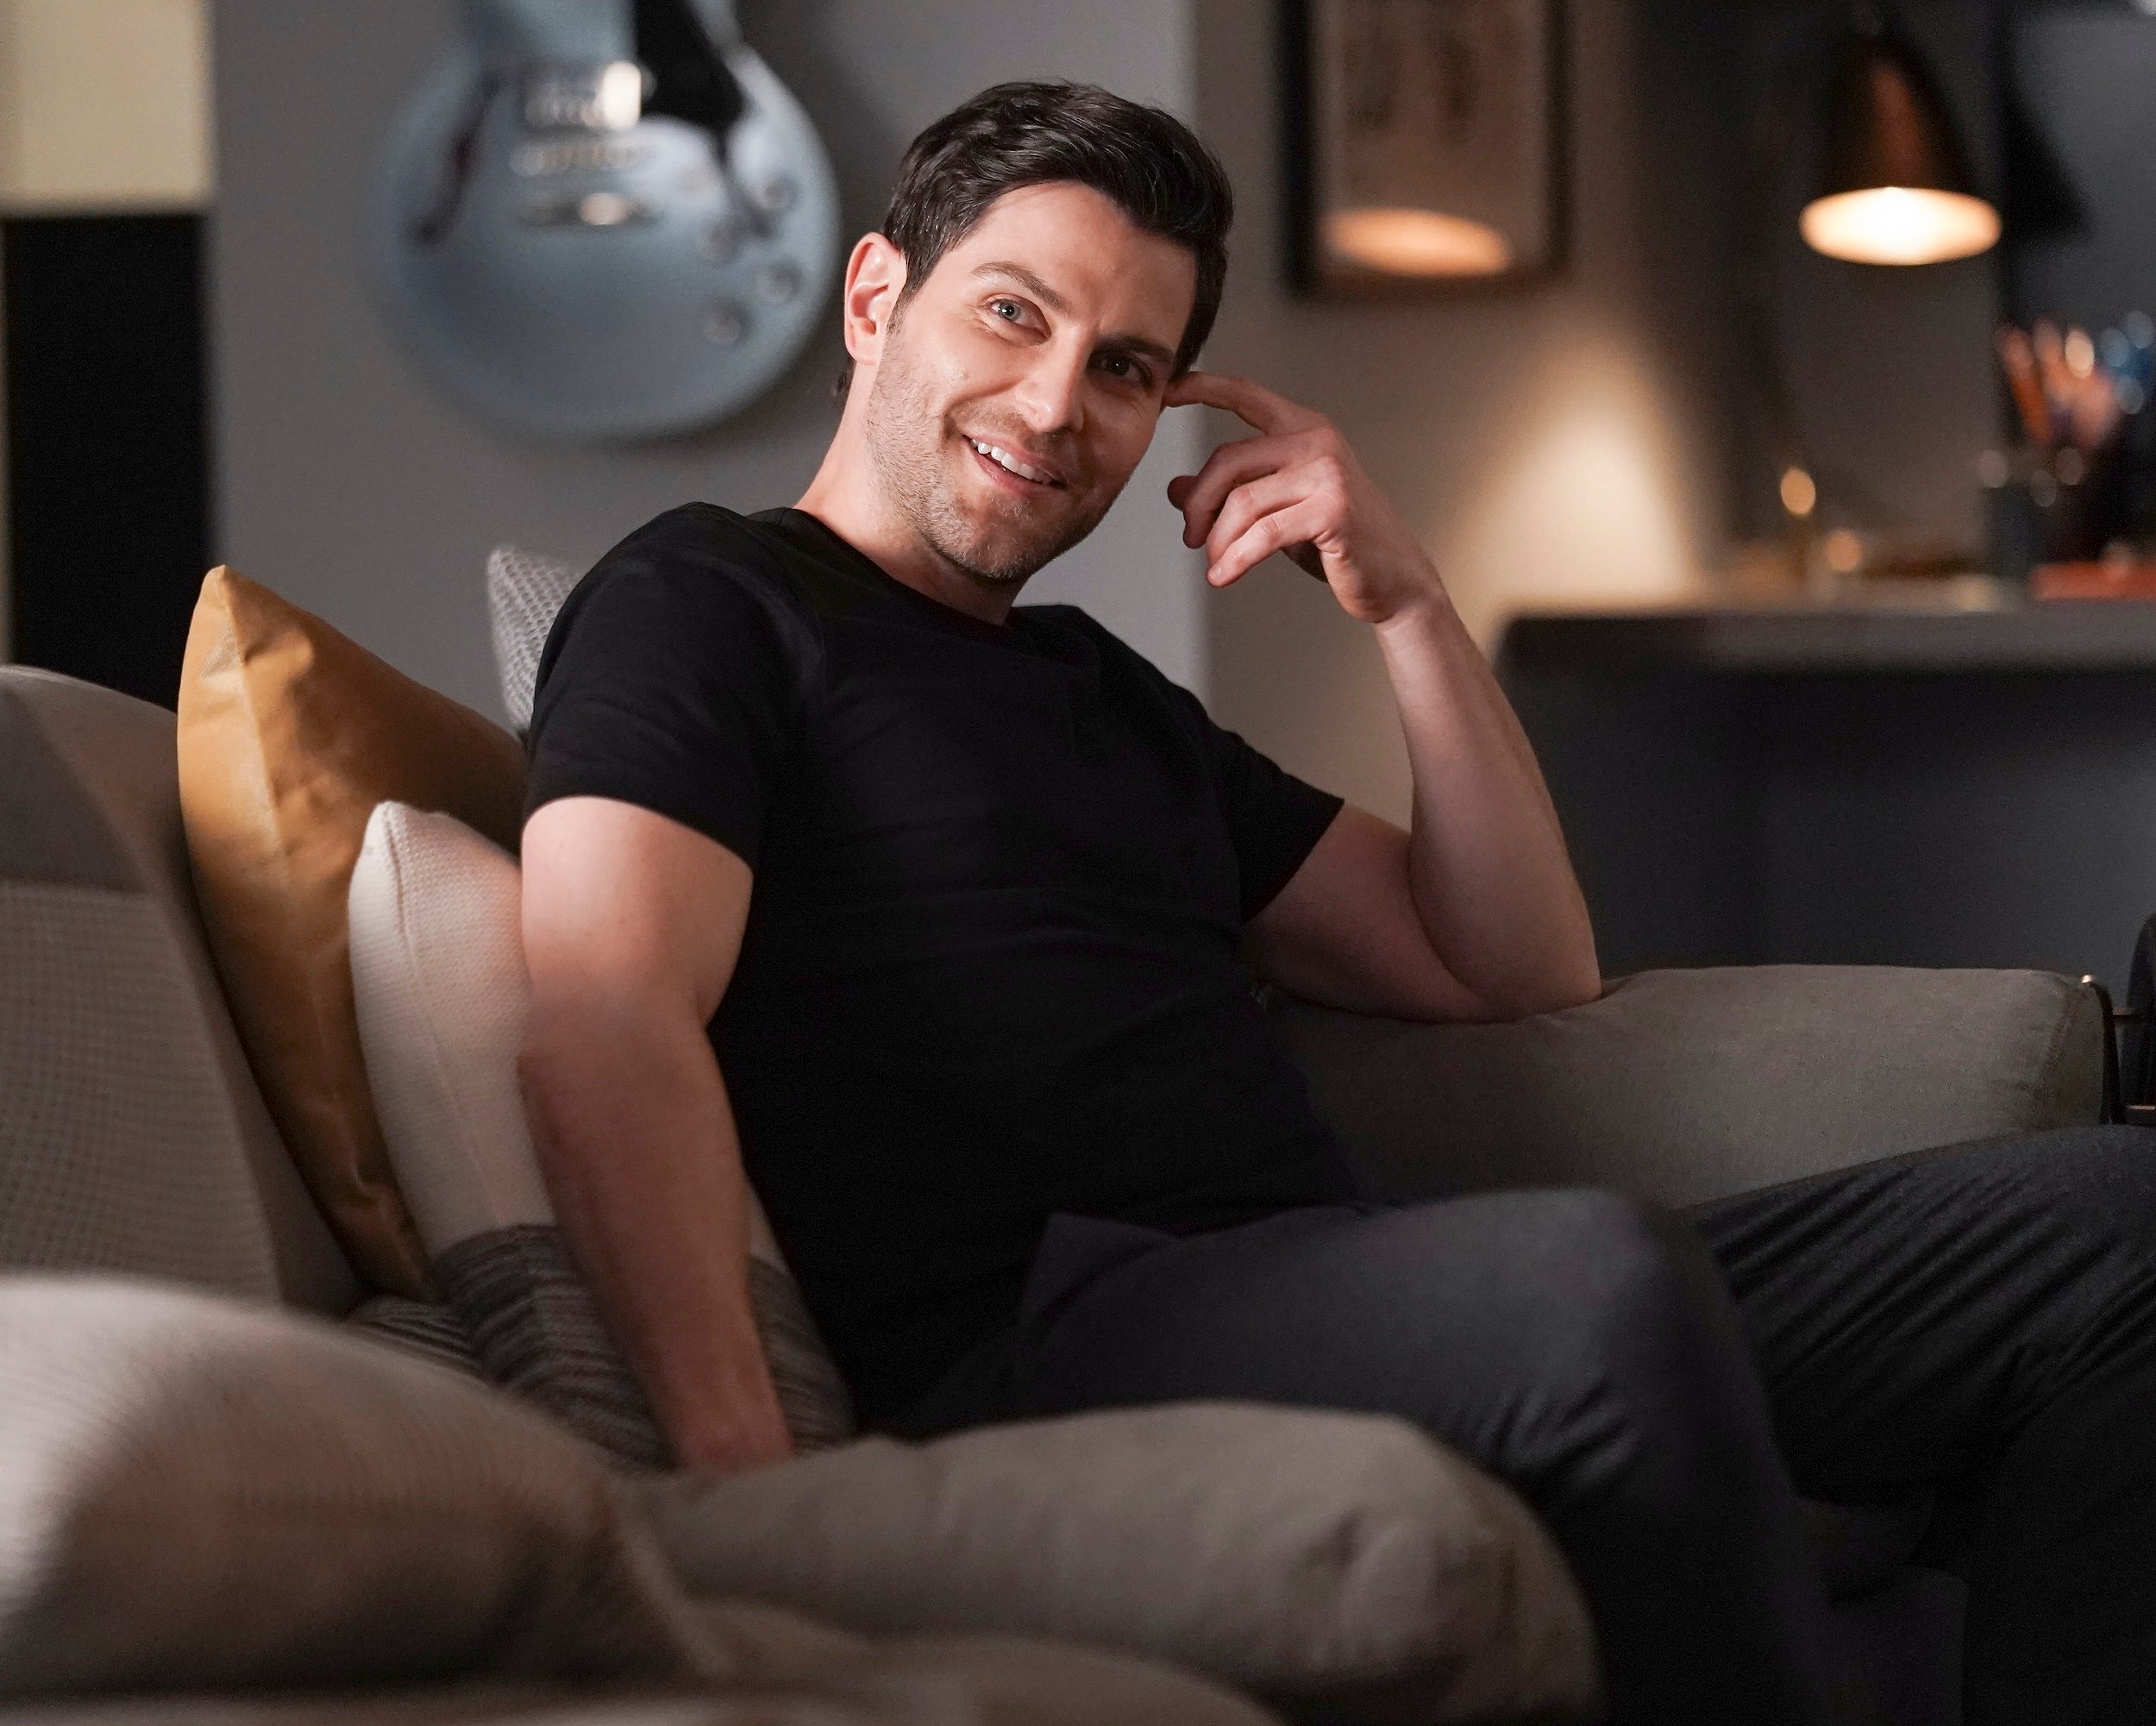 'A Million Little Things' David Giuntoli as Eddie Saville sitting on the couch smiling